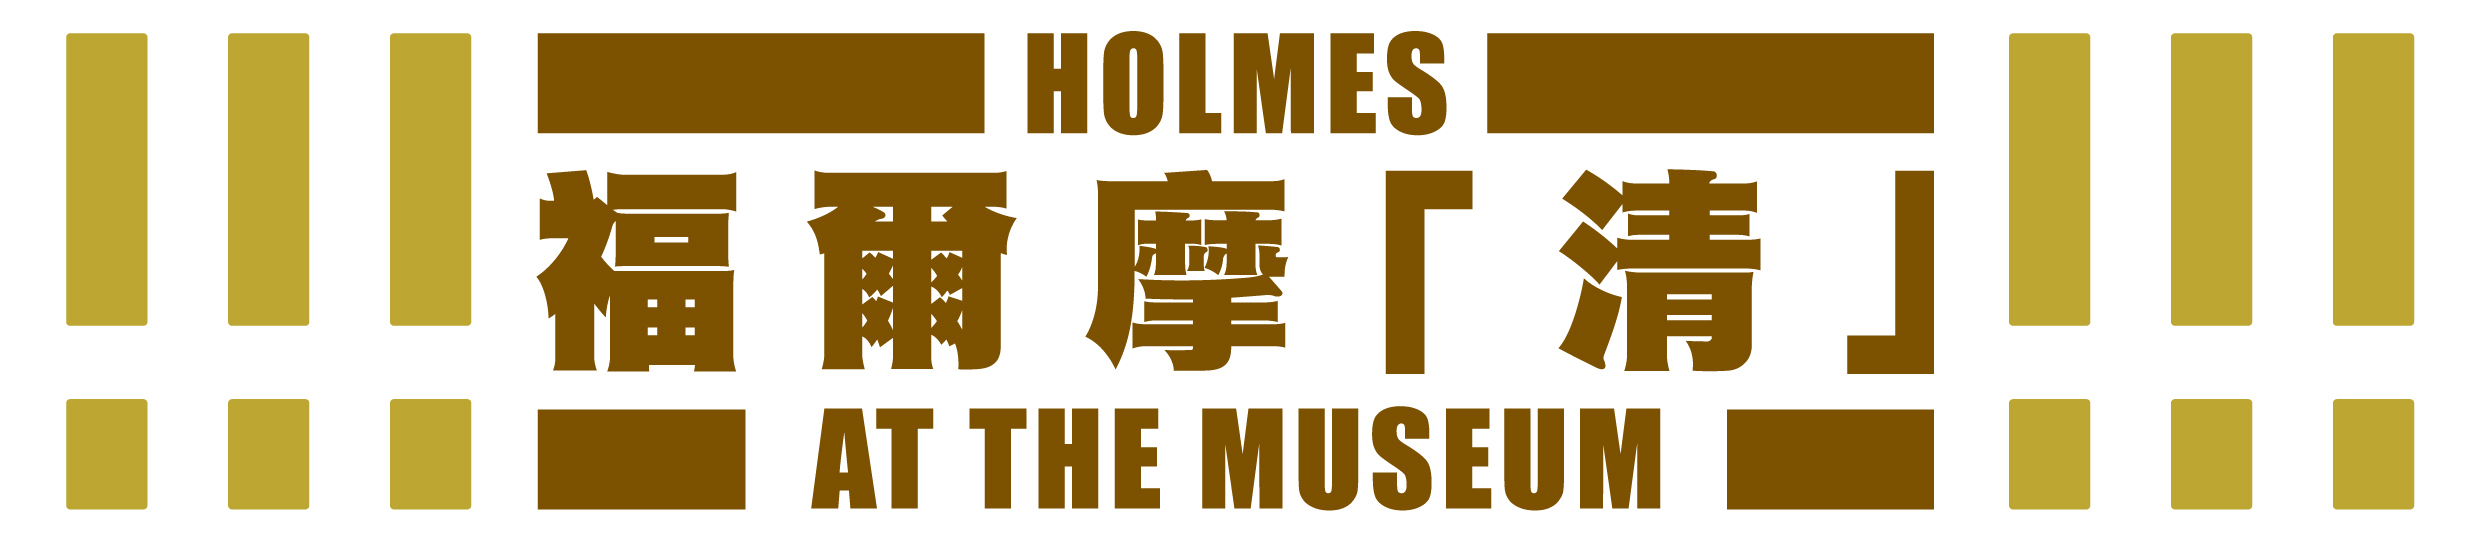 Holmes at the Museum